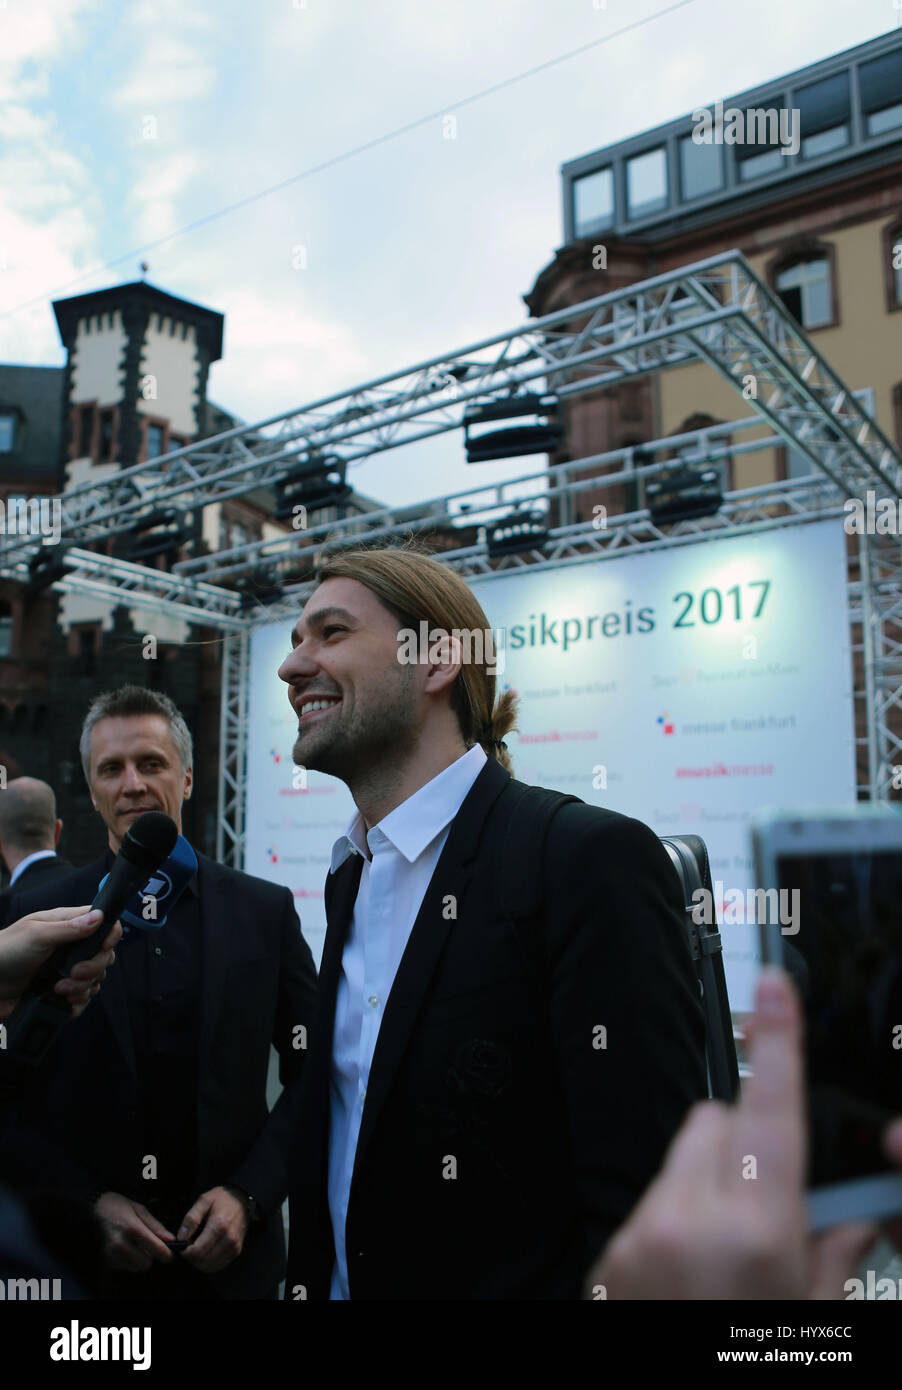 Frankfurt. 7th Apr, 2017. Violinist David Garrett speaks to the media during the awarding ceremony of the Frankfurt Music Prize 2017 at the St Paul's Church in Frankfurt, Germany on April 7, 2017. David Garrett was honored with the Frankfurt Music Prize 2017 on Friday. Credit: Luo Huanhuan/Xinhua/Alamy Live News Stock Photo